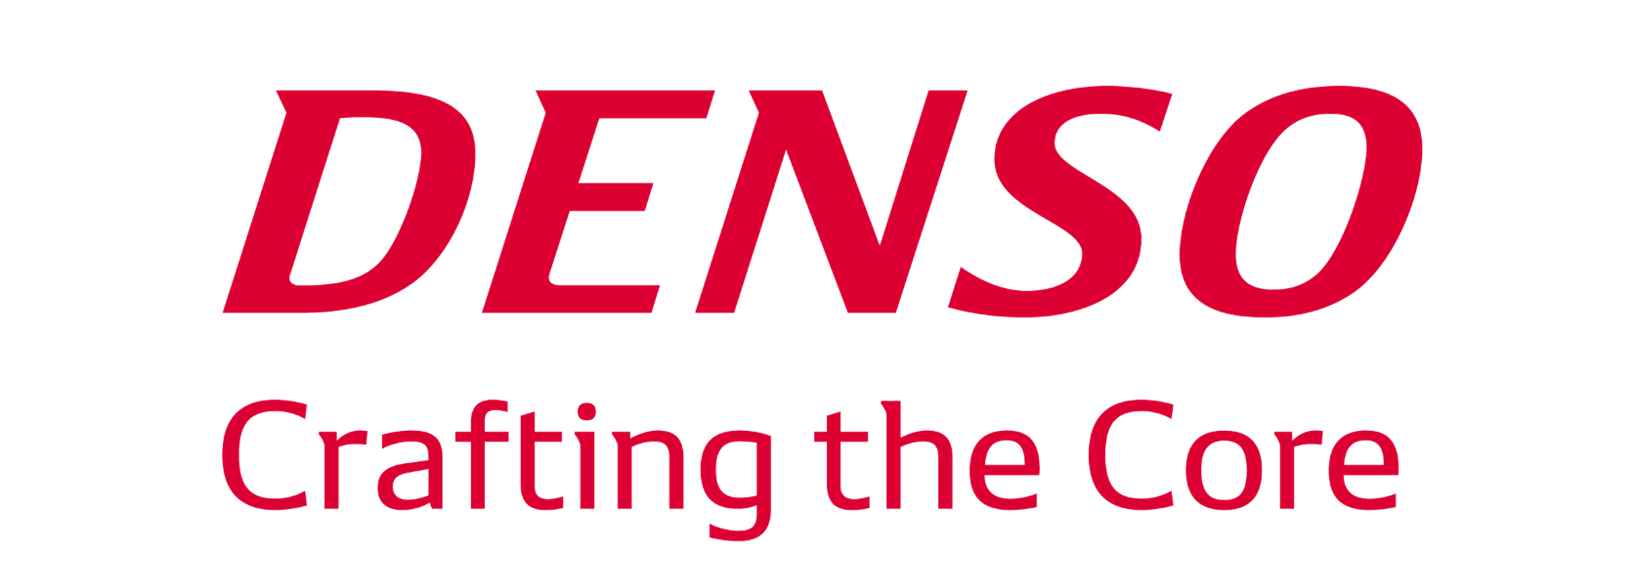 Denso Crafting the Core Logo